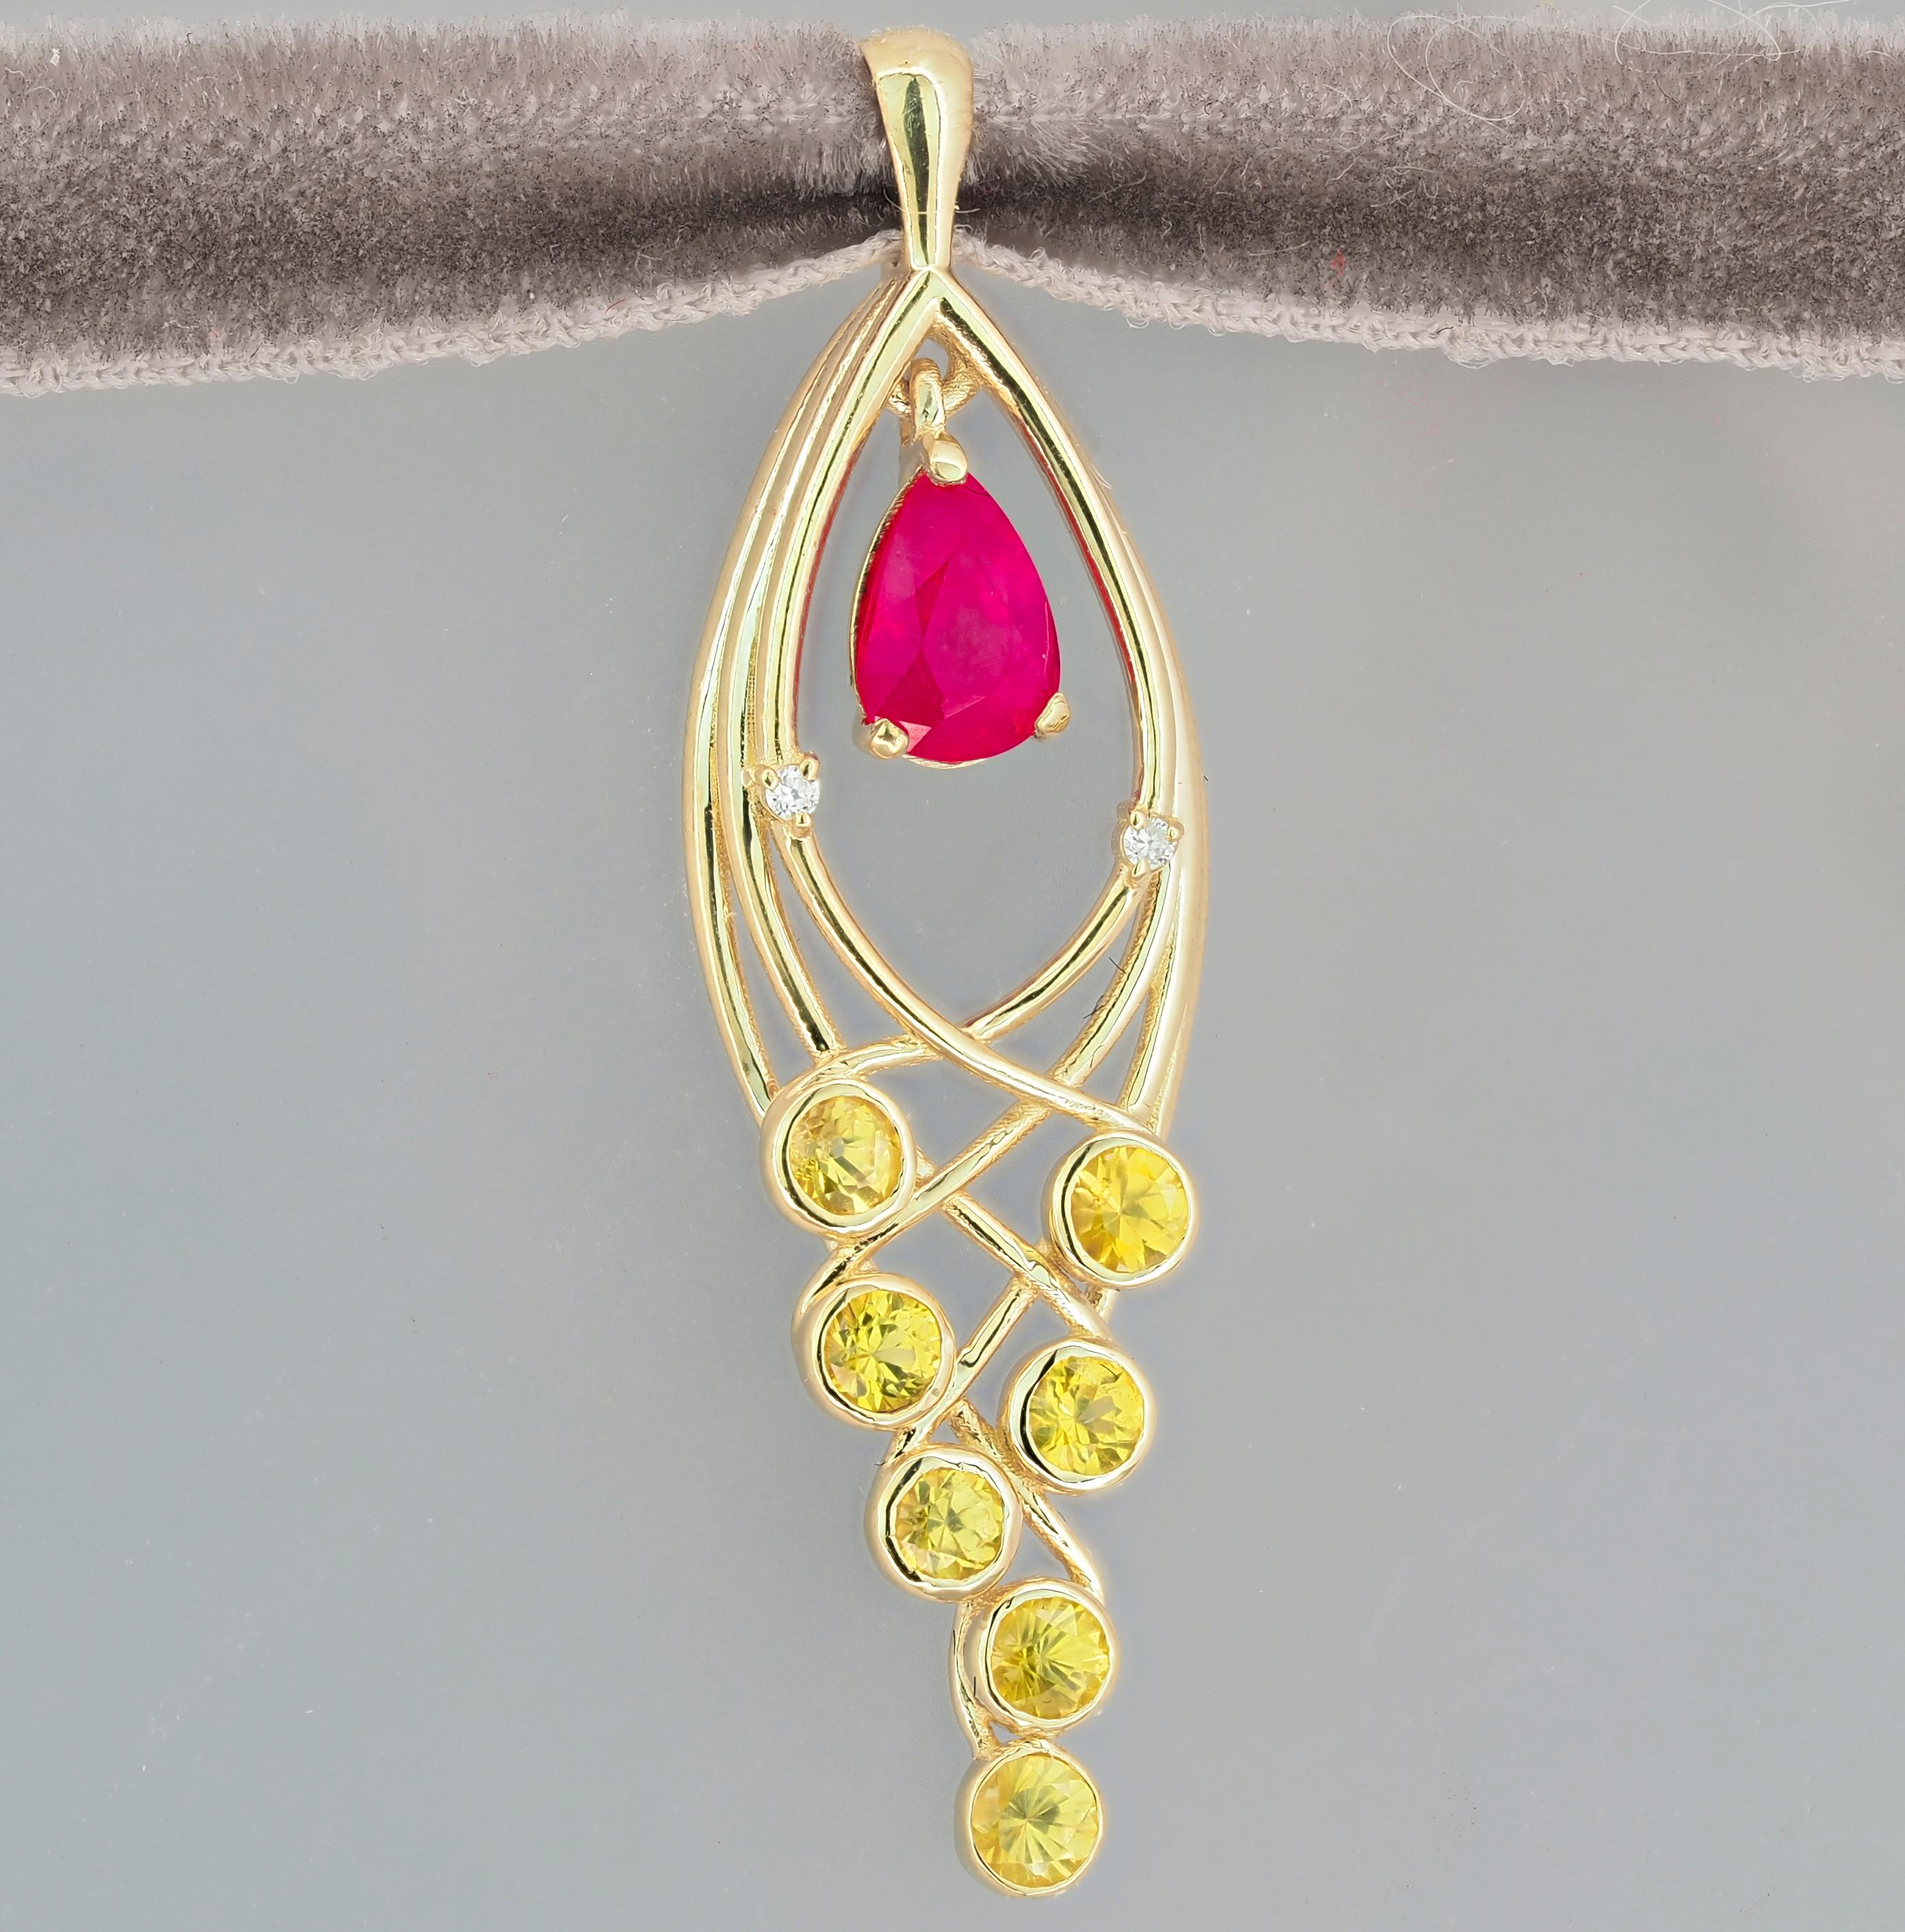 14 kt solid gold pendant with natural ruby, sapphires and diamonds. July birthstone.
Weight: 1.4 g.
Pendant size: 35 х 10.33 mm. 
Central stone: Ruby
Cut: pear
Weight: approx 0.70 ct.
Color: Red
Clarity: Transparent  with inclusions
Sapphires, round